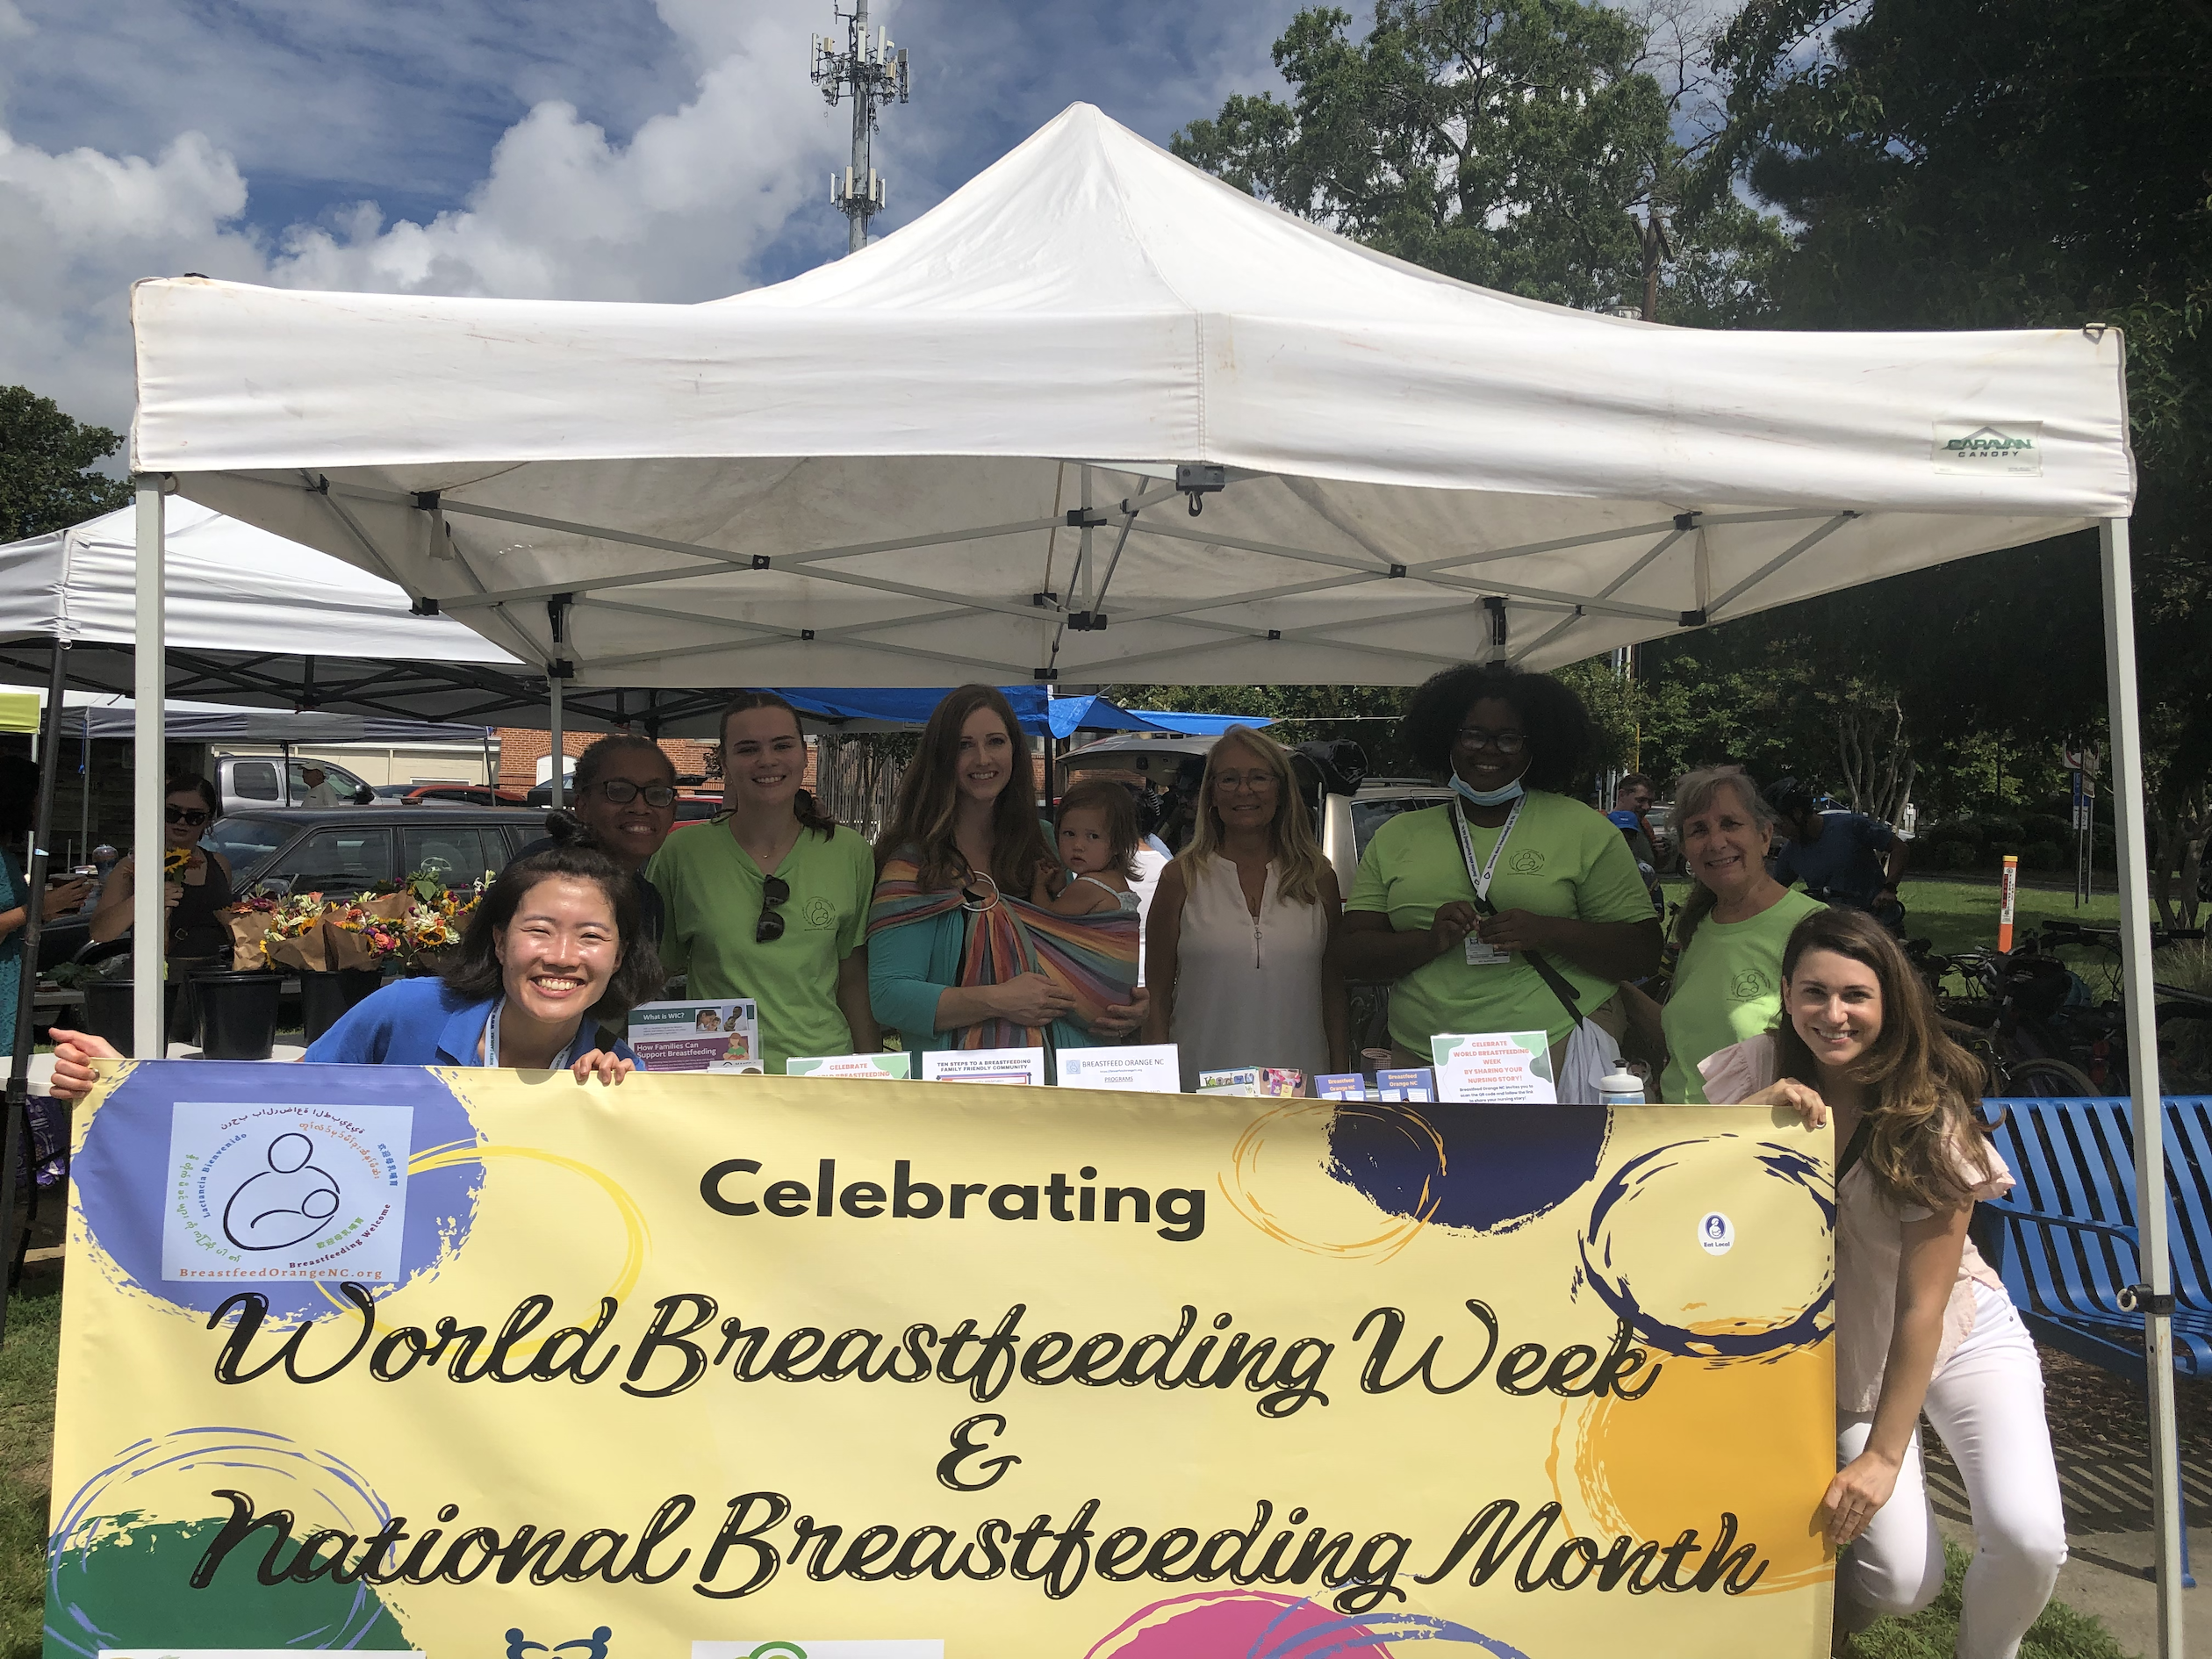 Eight adults and one child behind banner with text: Celebrating World Breastfeeding Week & National Breastfeeding Month.